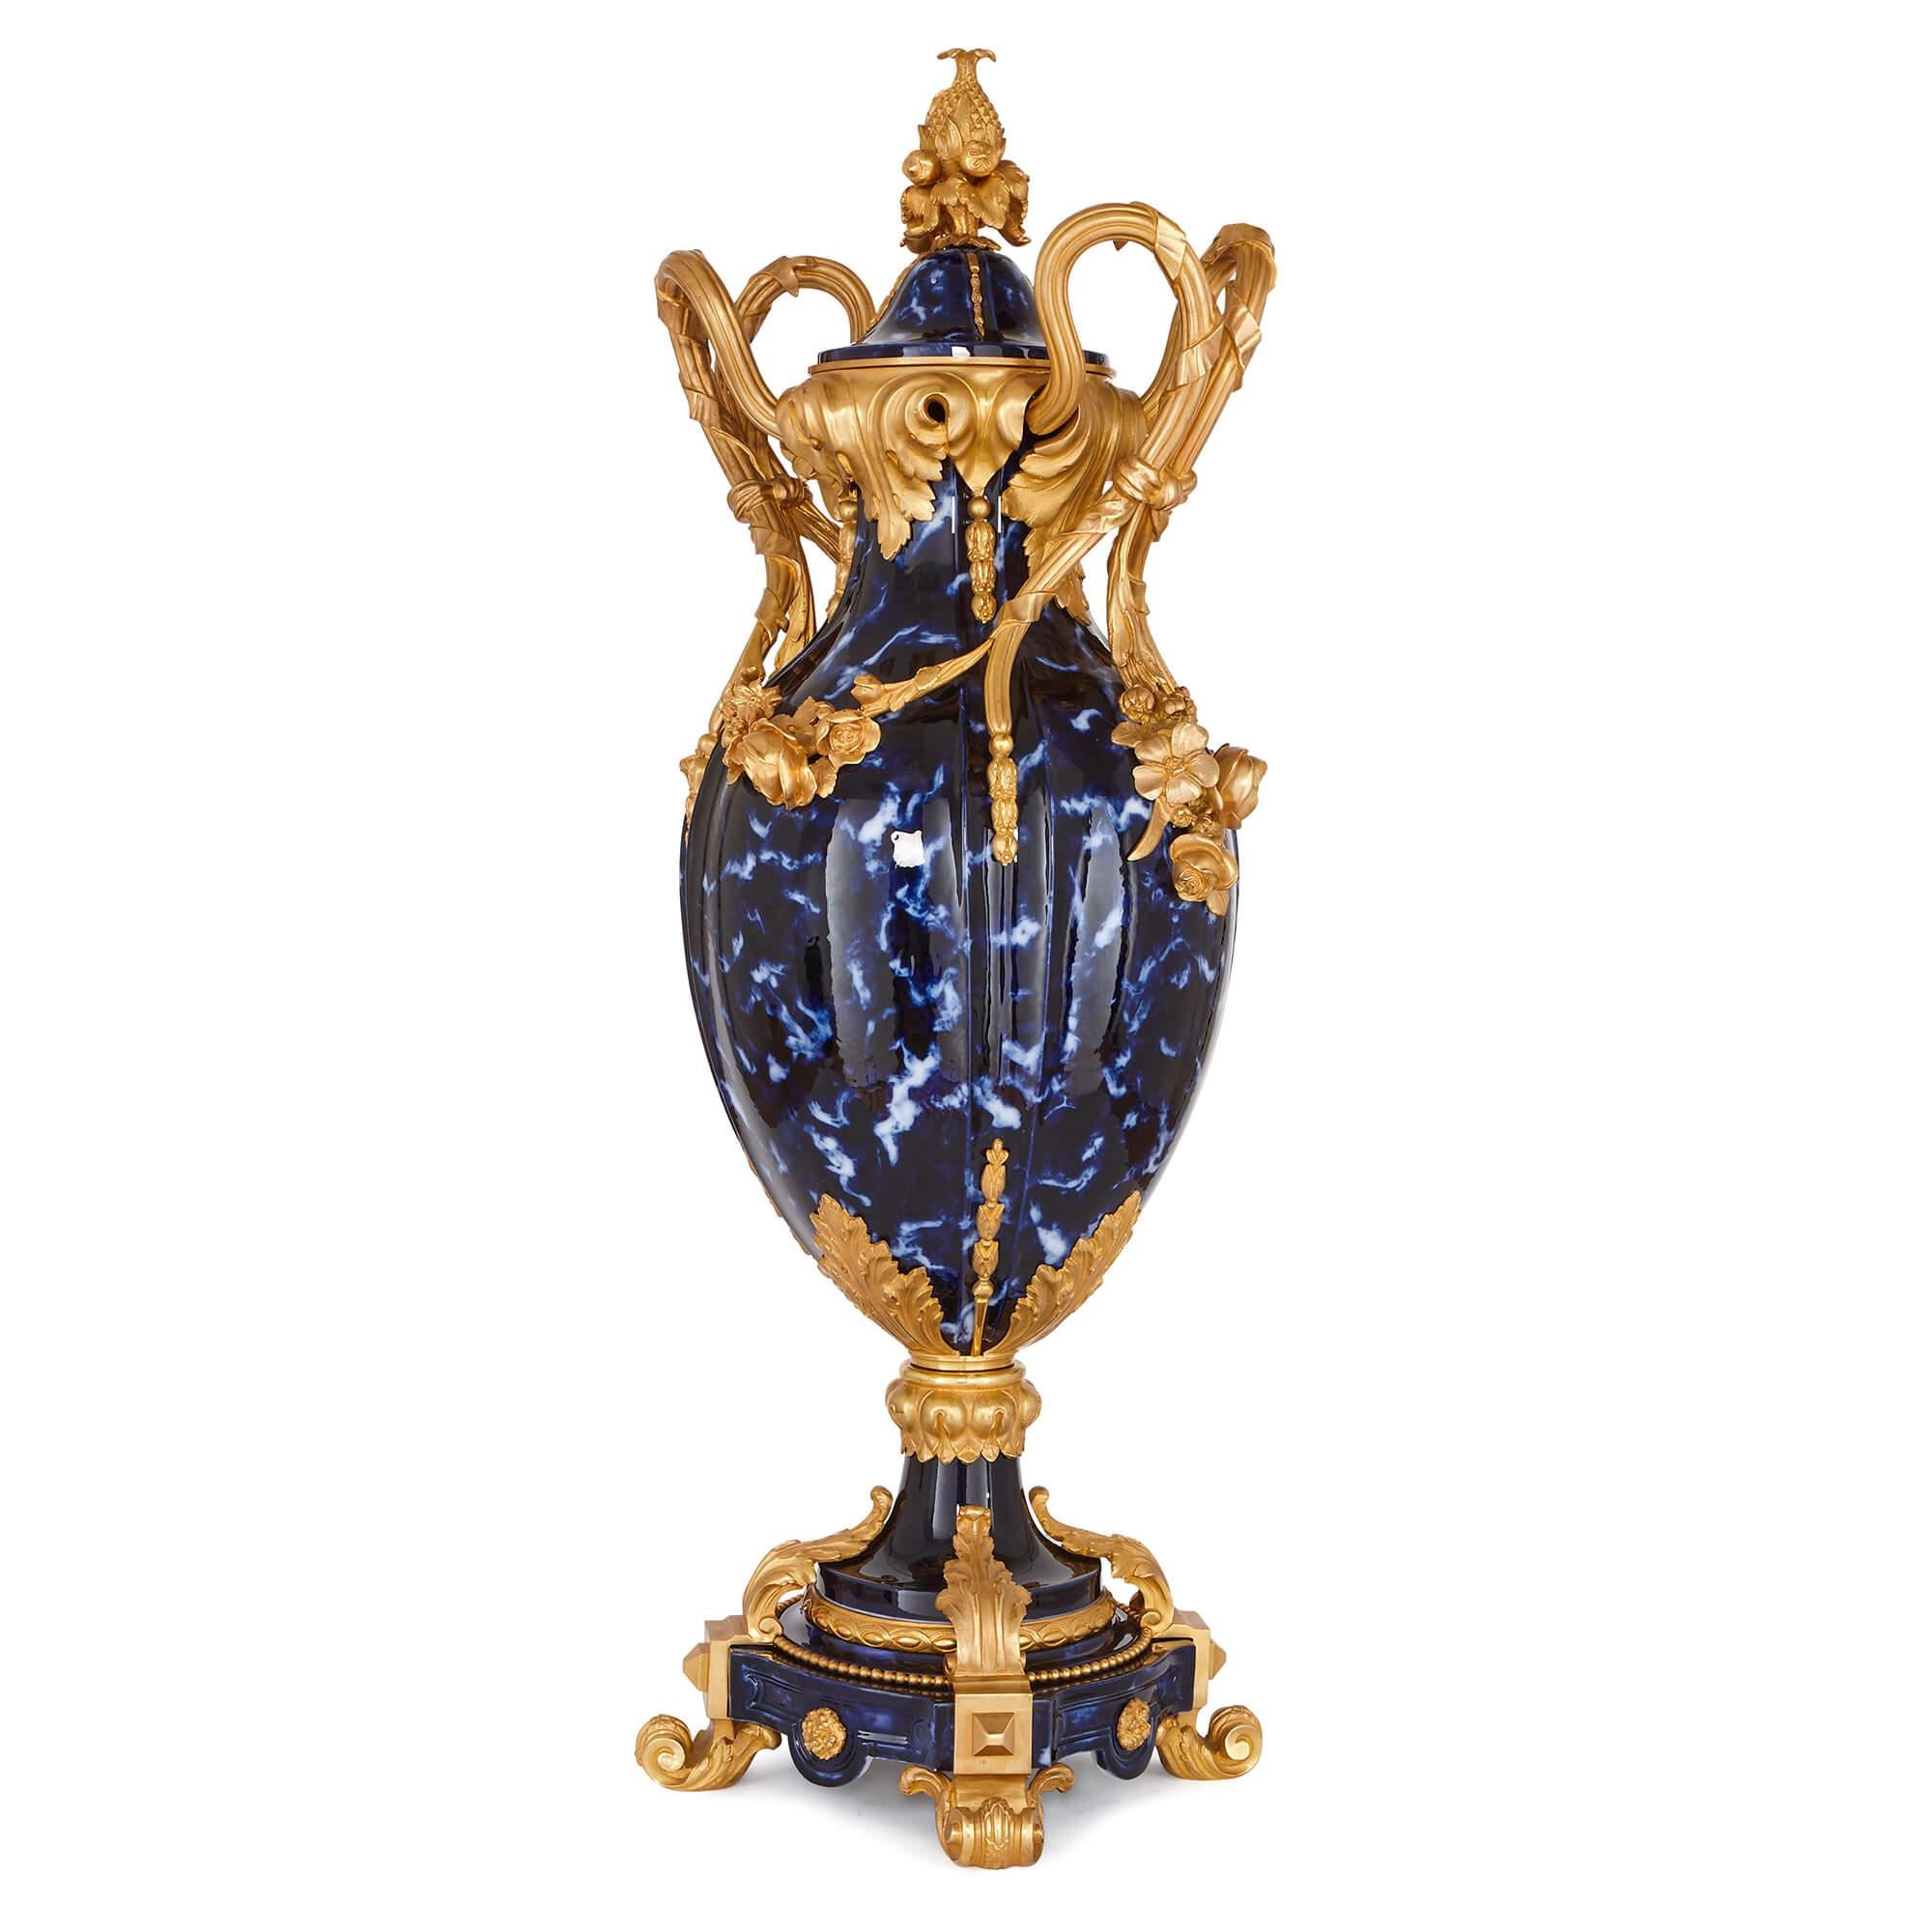 The two vases are of large, ovoid form, and feature fluted bodies which are crafted in ceramic with a mottled blue colouring. The vases are mounted with twin gilt bronze scrolling handles that are joined by floral swags and garlands, and their